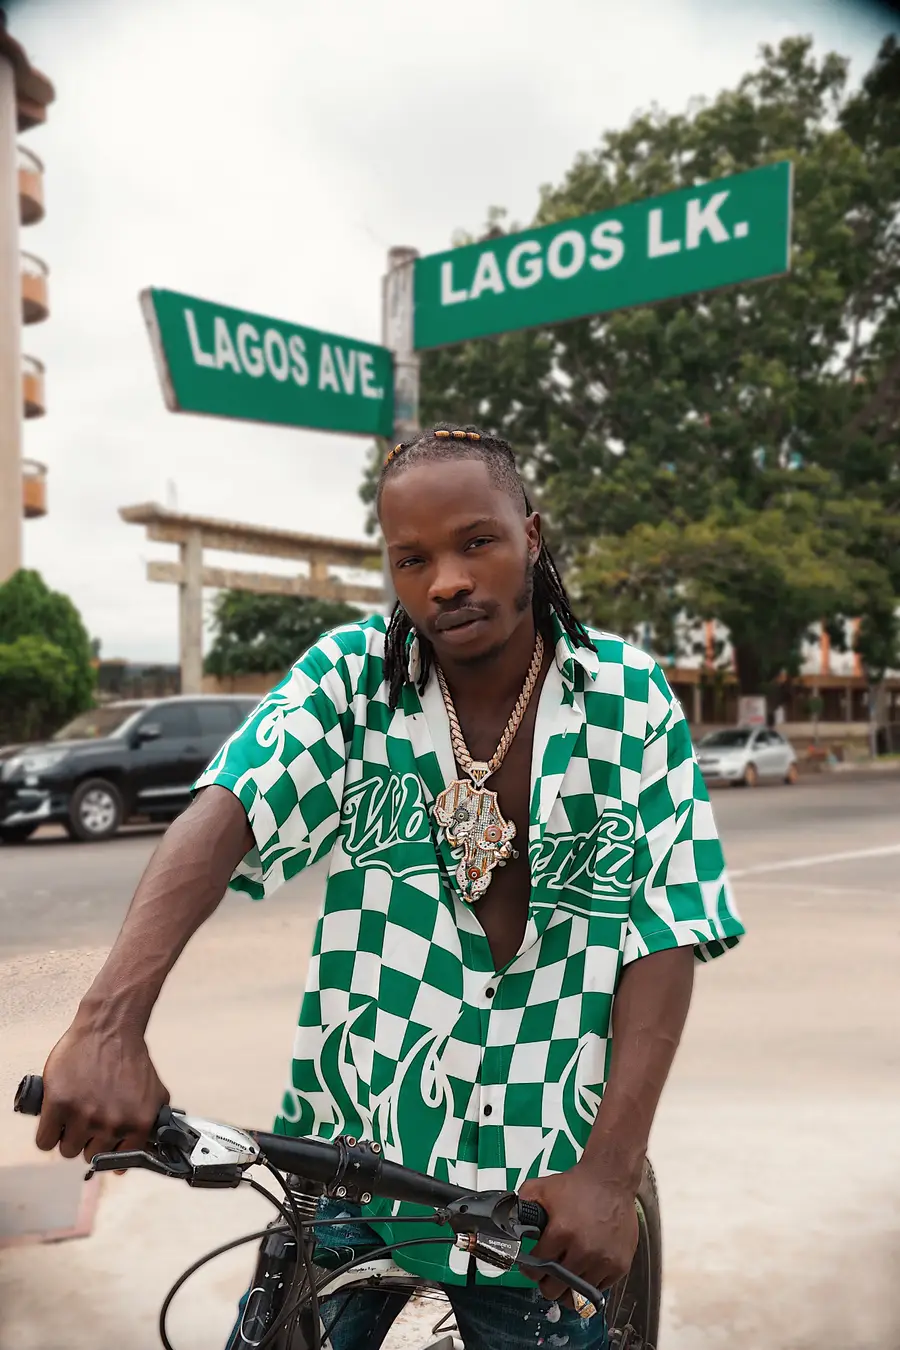 Naira Marley regains 100k followers after losing massive followers over Mohbad's death